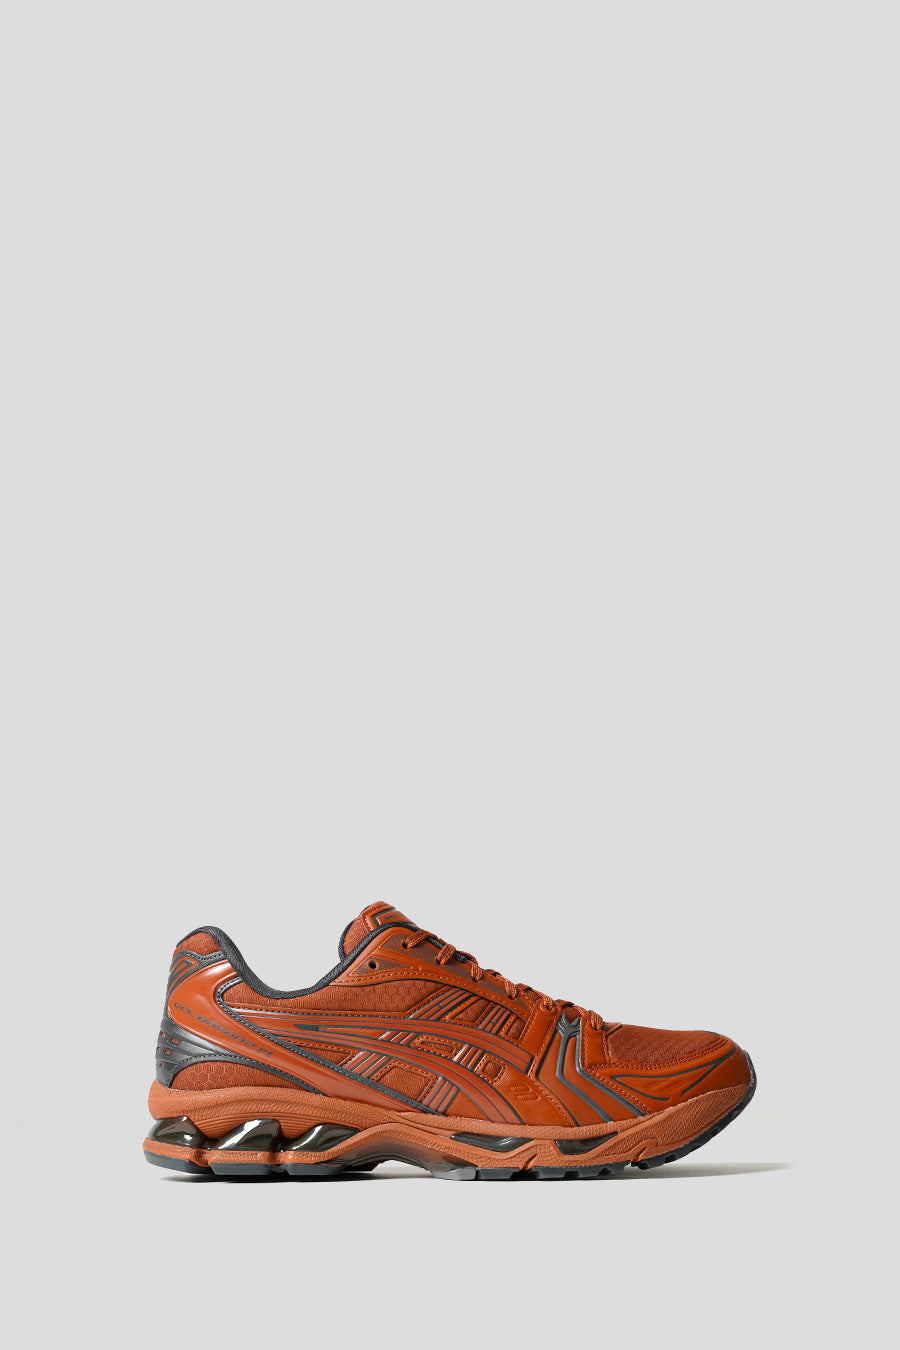 Asics - KAYANO 14 RUSTY BROWN AND GRAPHITE GREY SNEAKERS - LE LABO STORE